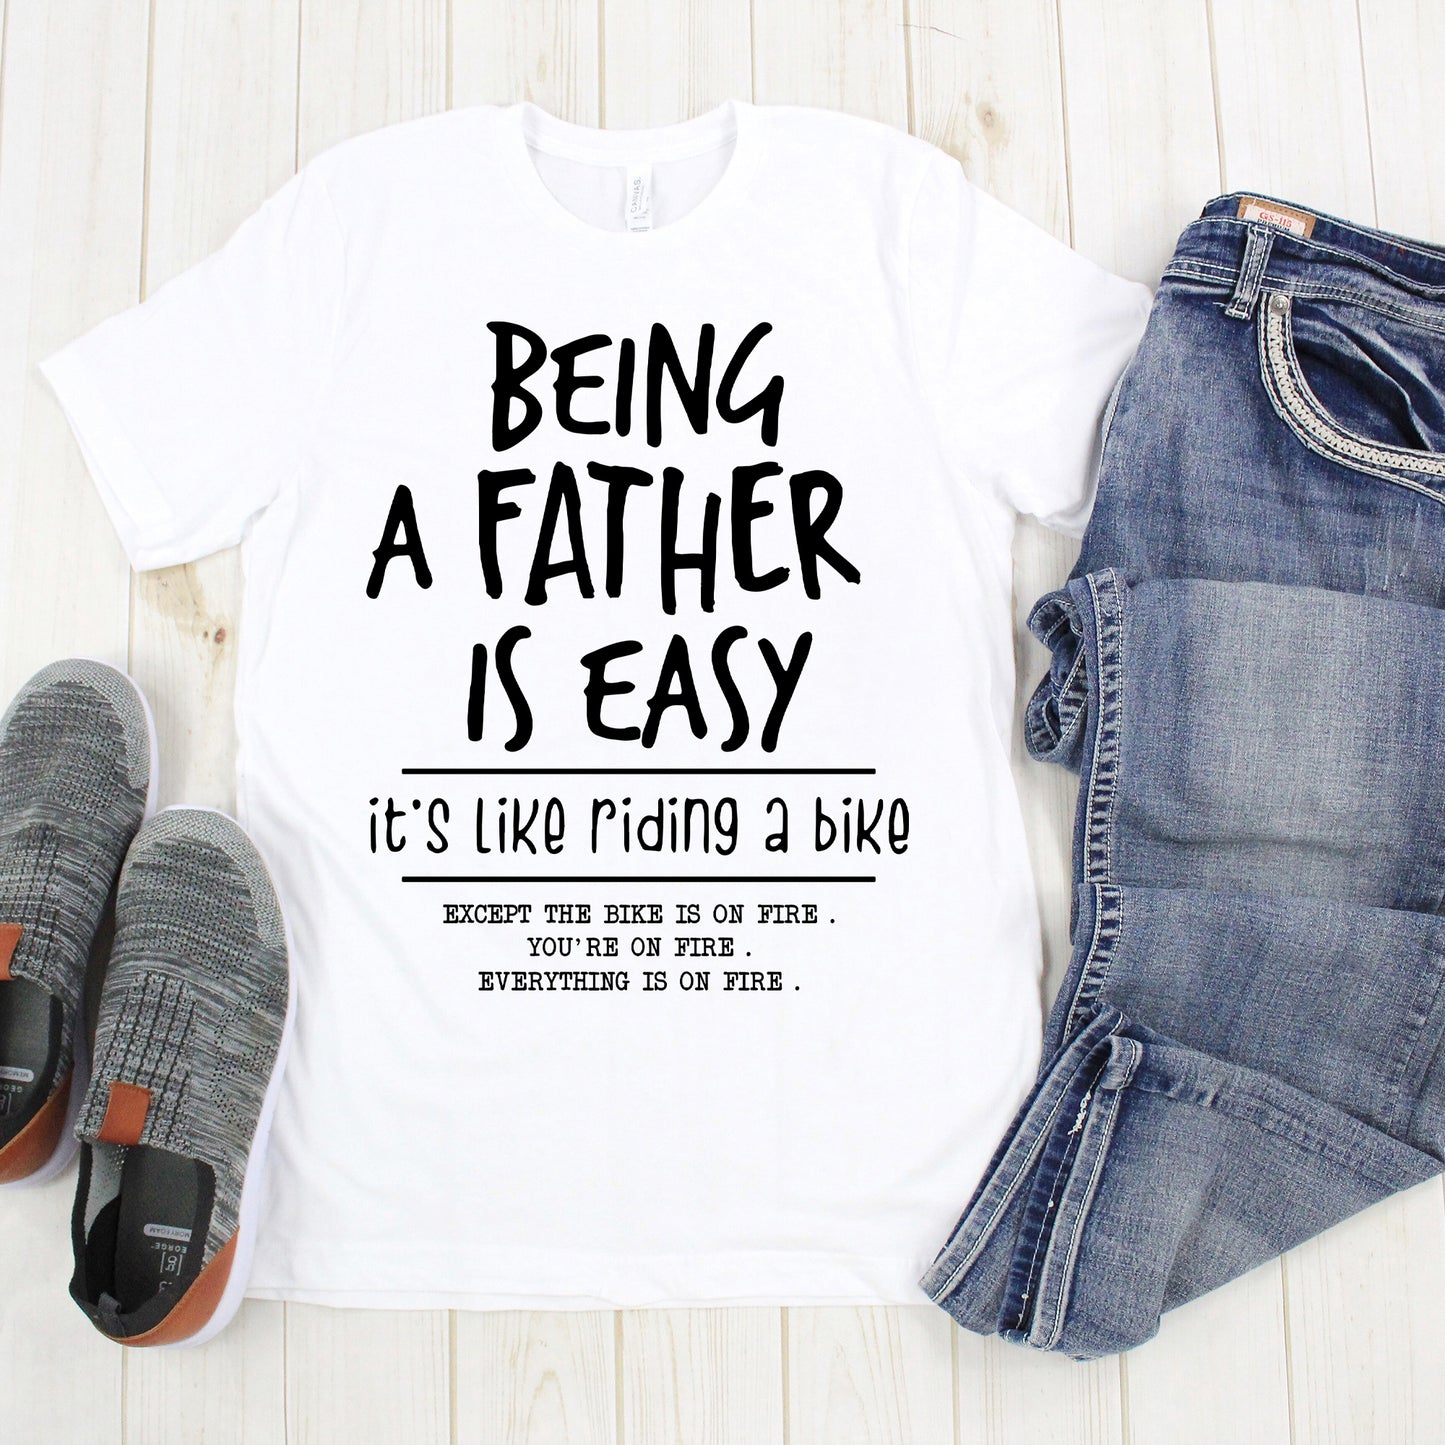 Being A Father Is Easy | Short Sleeve Crew Neck